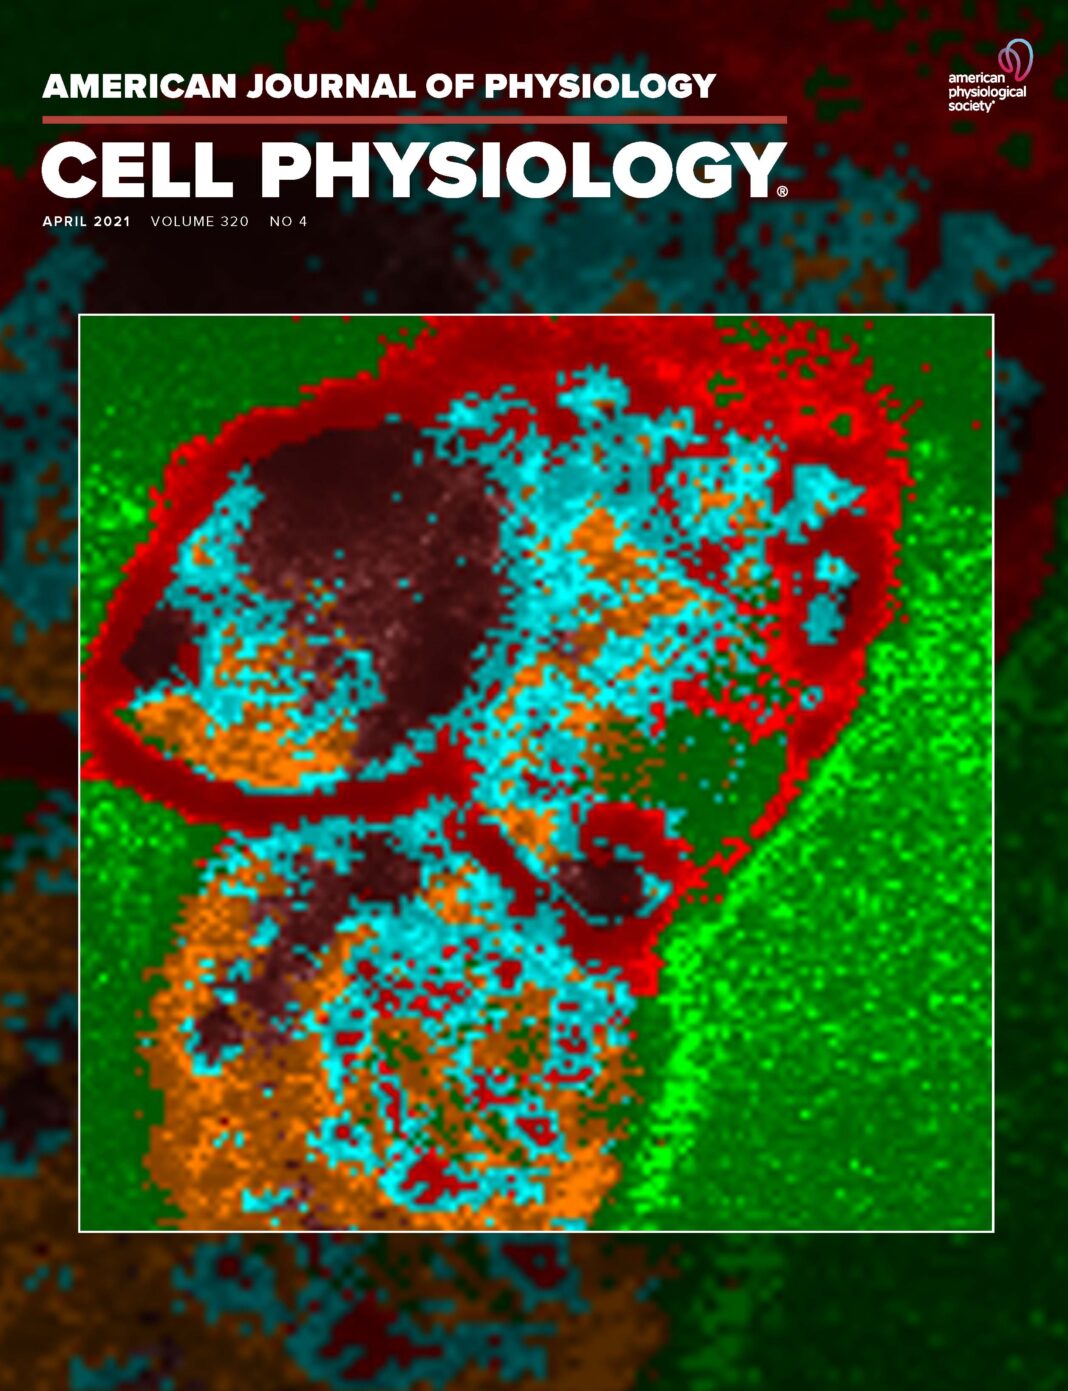 AJP Cell Physiology April issue cover featuring work of UofL biologists